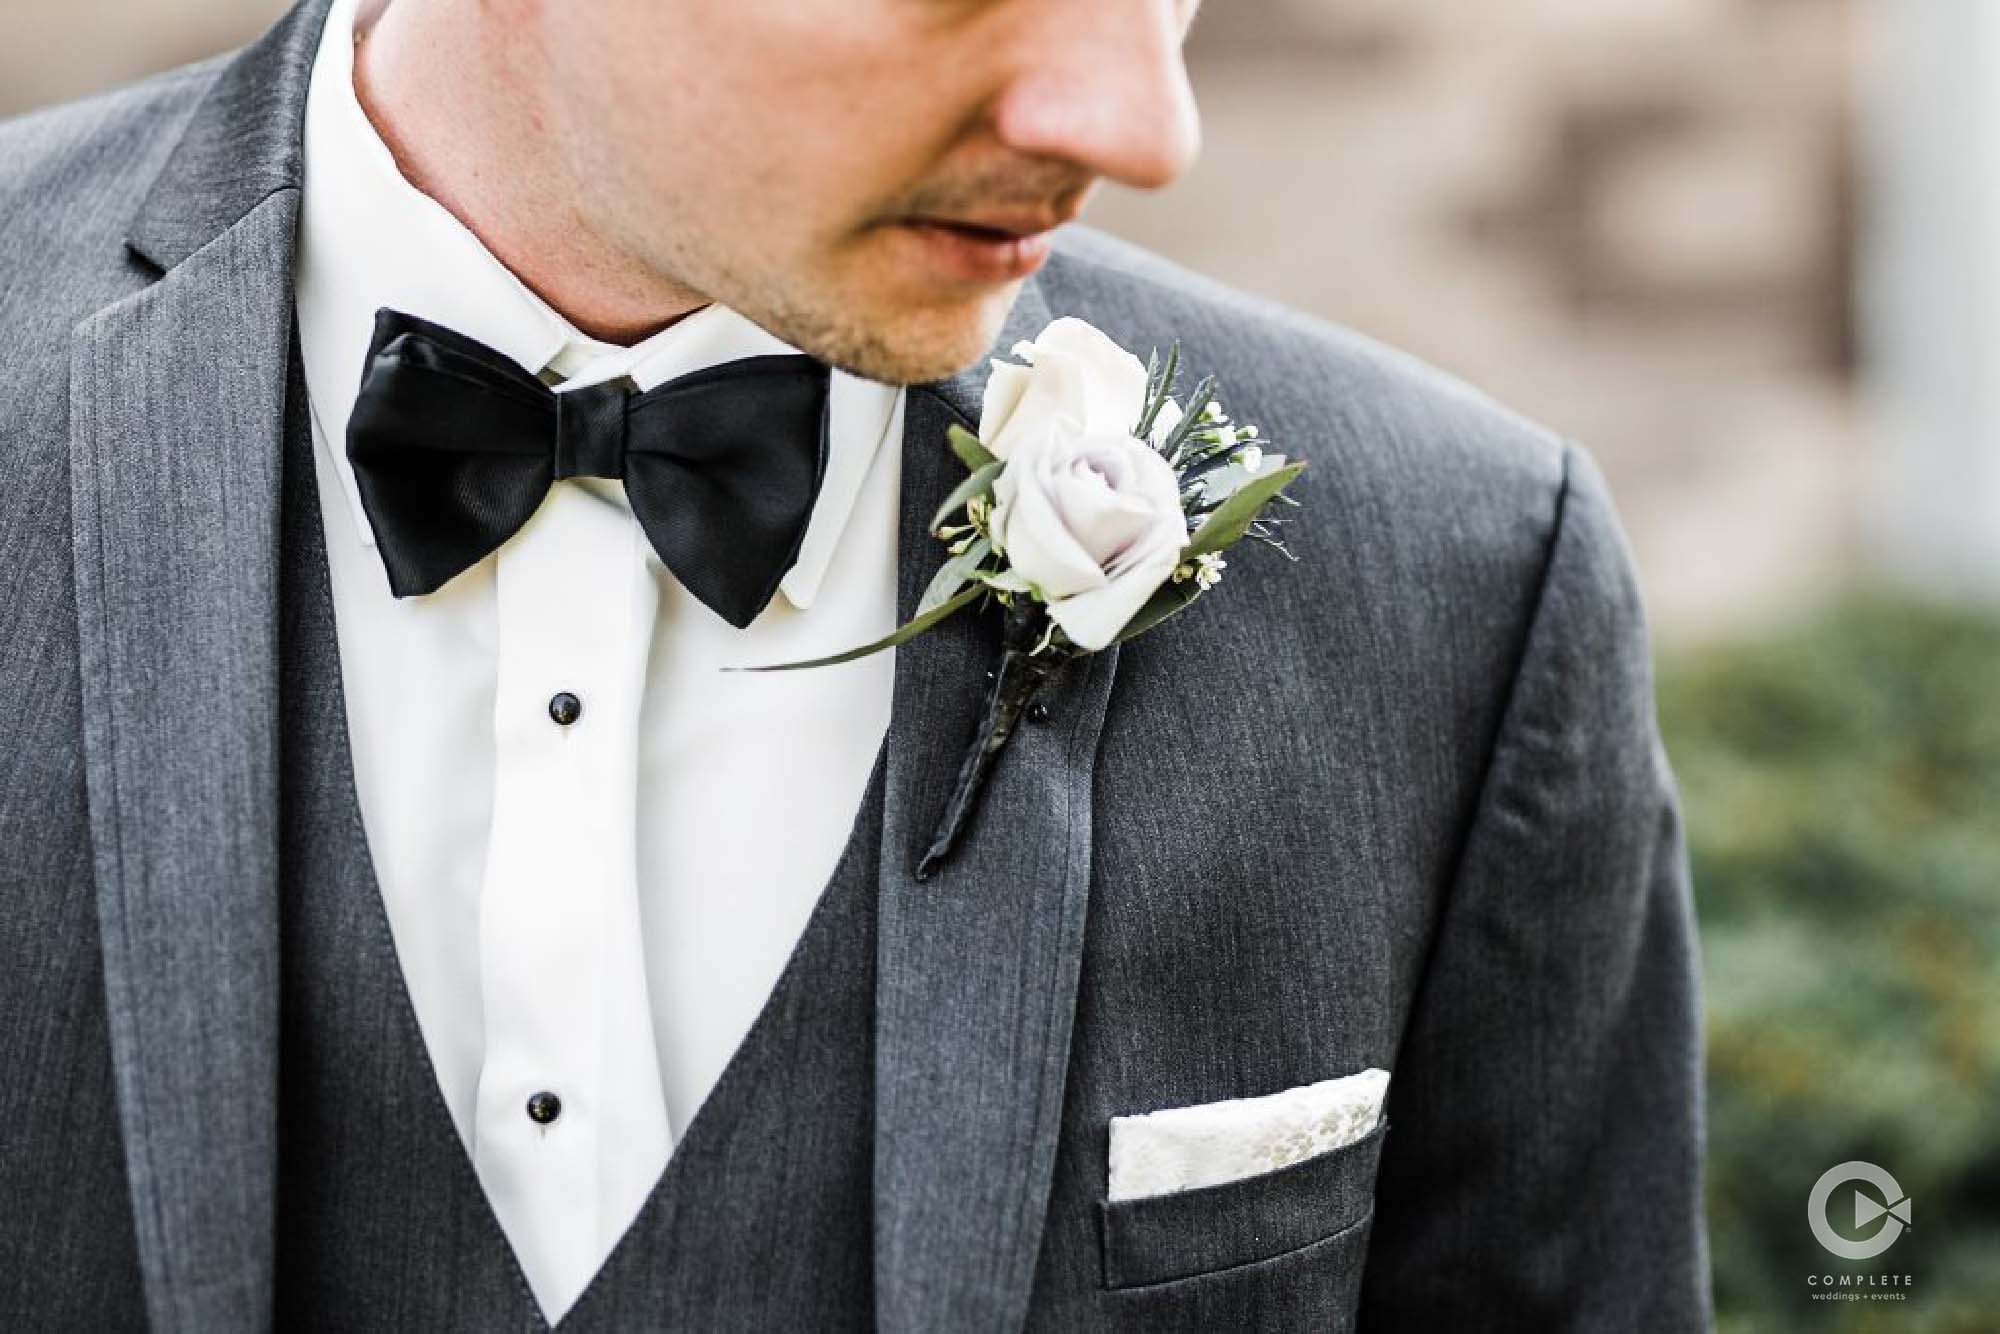 Groom Wear a Suit or Tuxedo? Complete Weddings + Events